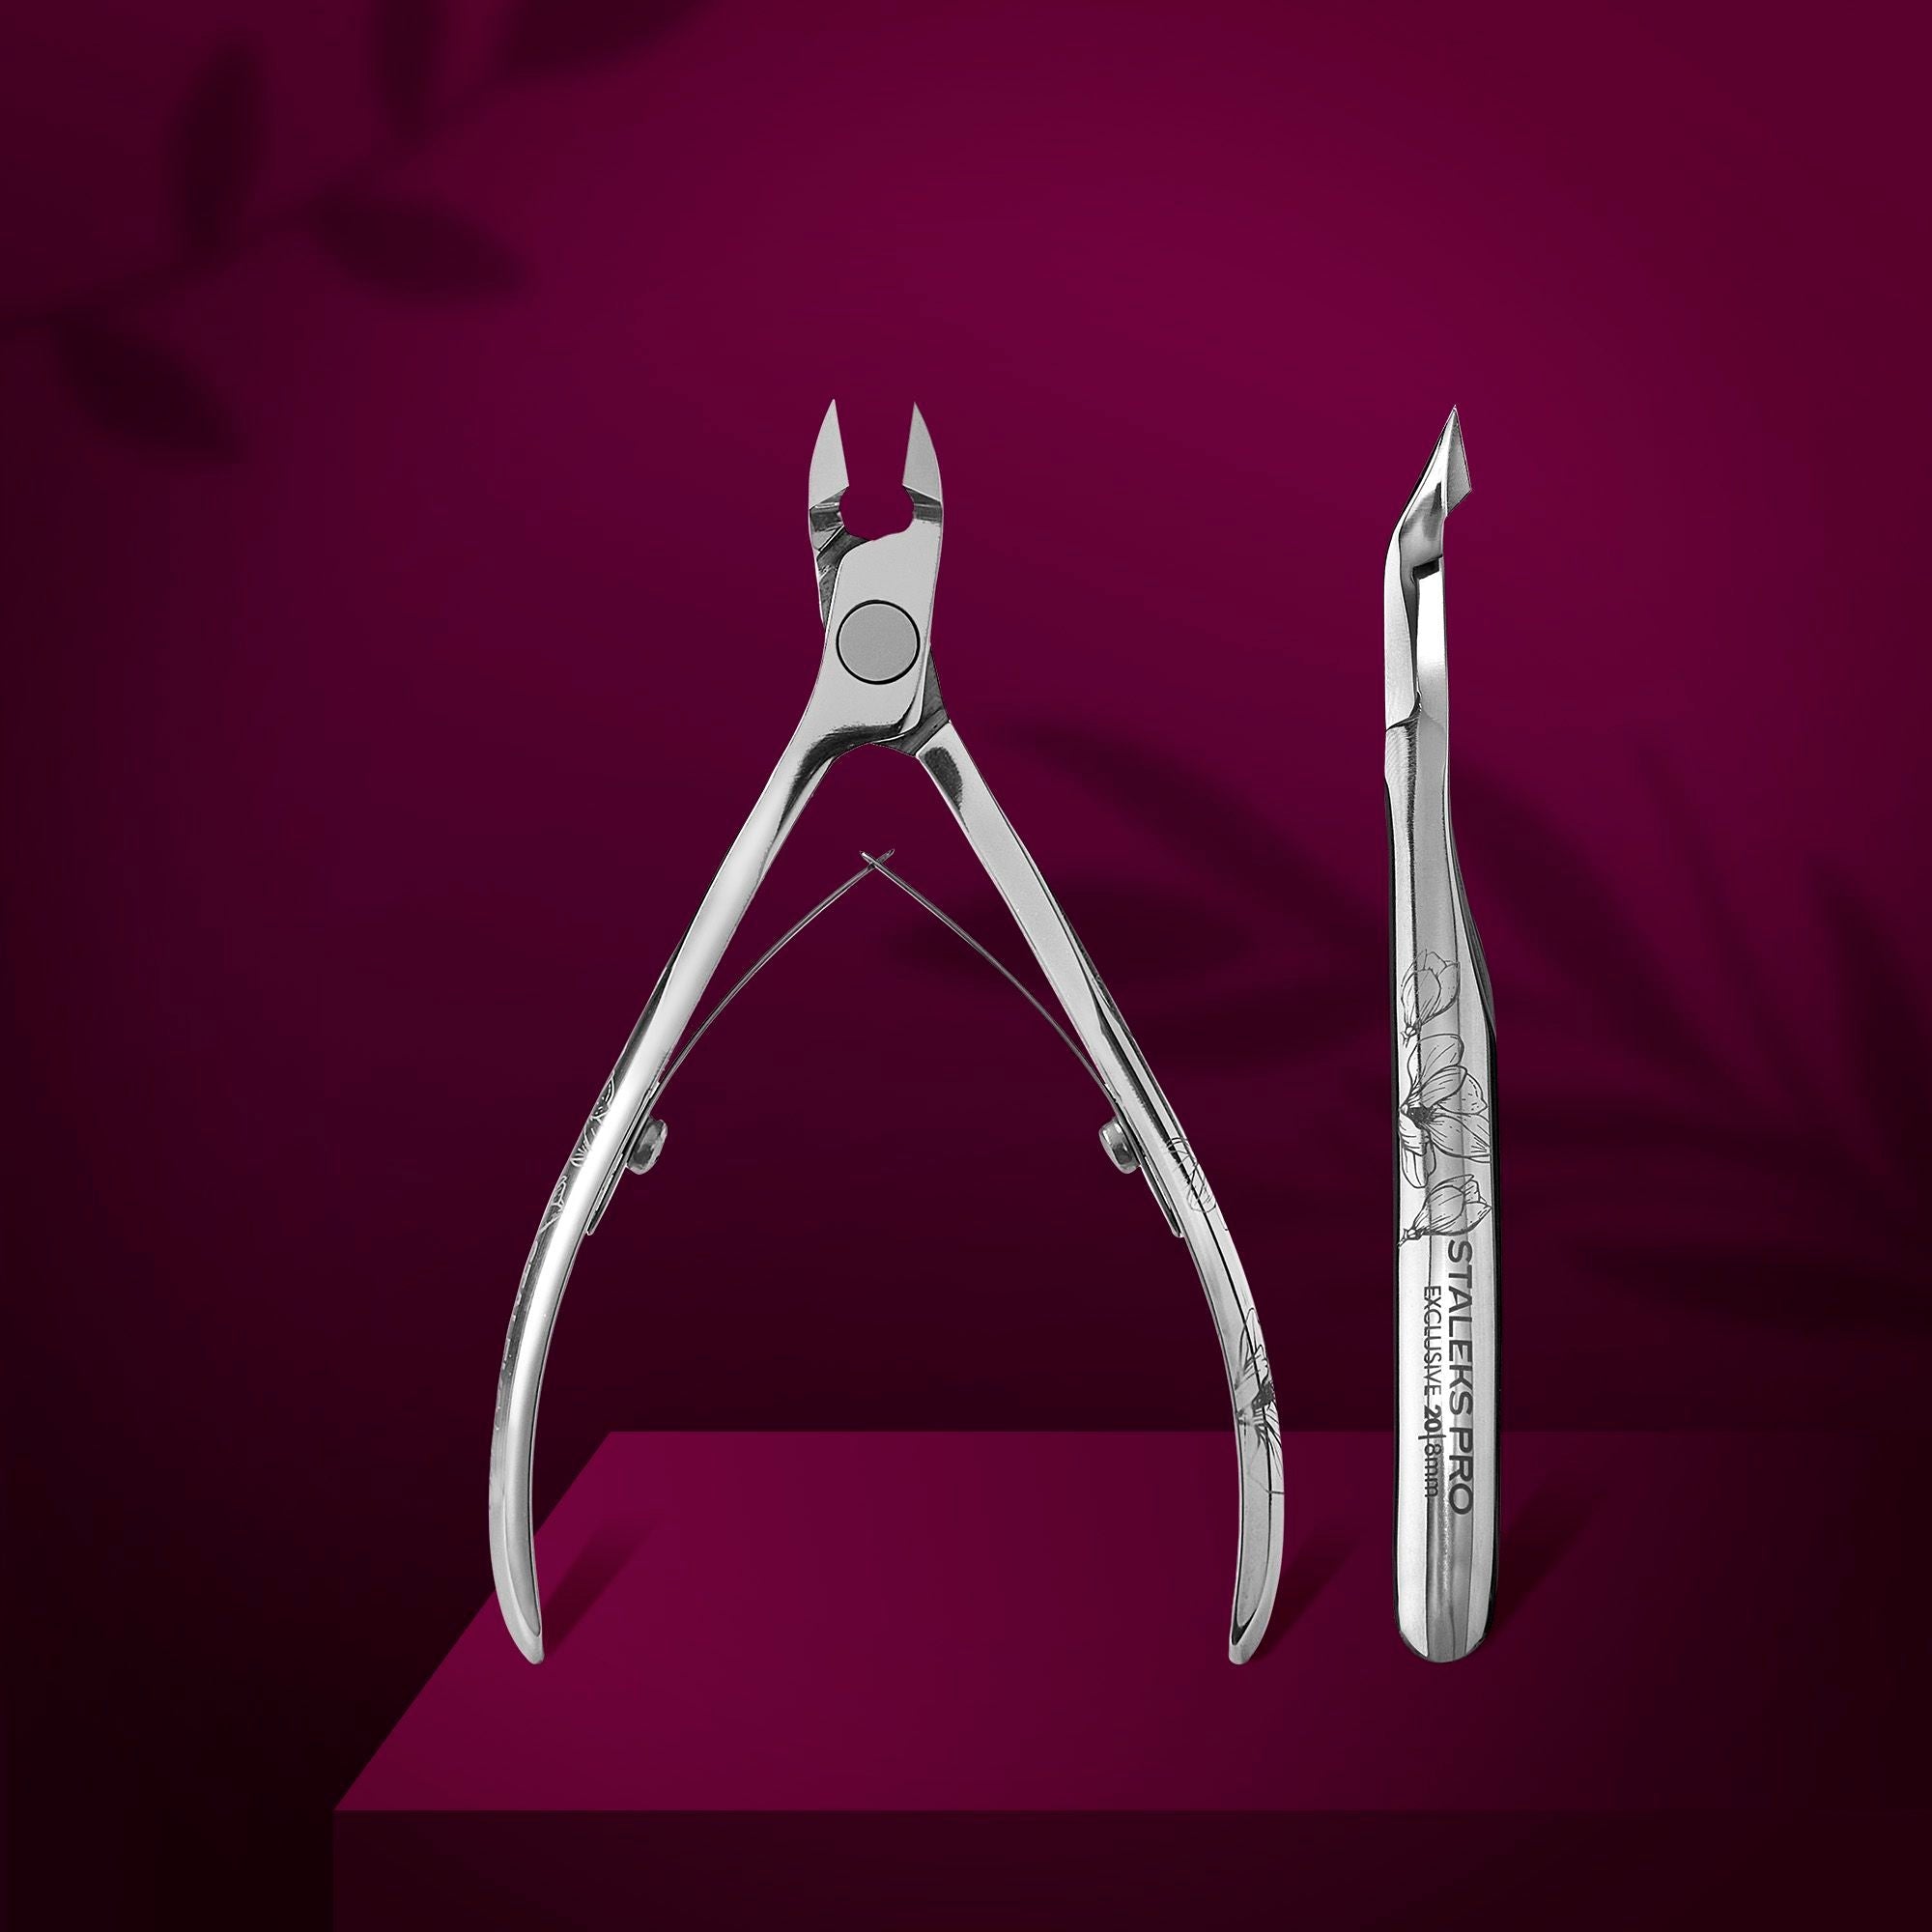 PROFESSIONAL CUTICLE NIPPERS STALEKS PRO EXCLUSIVE 20  TYPE 8